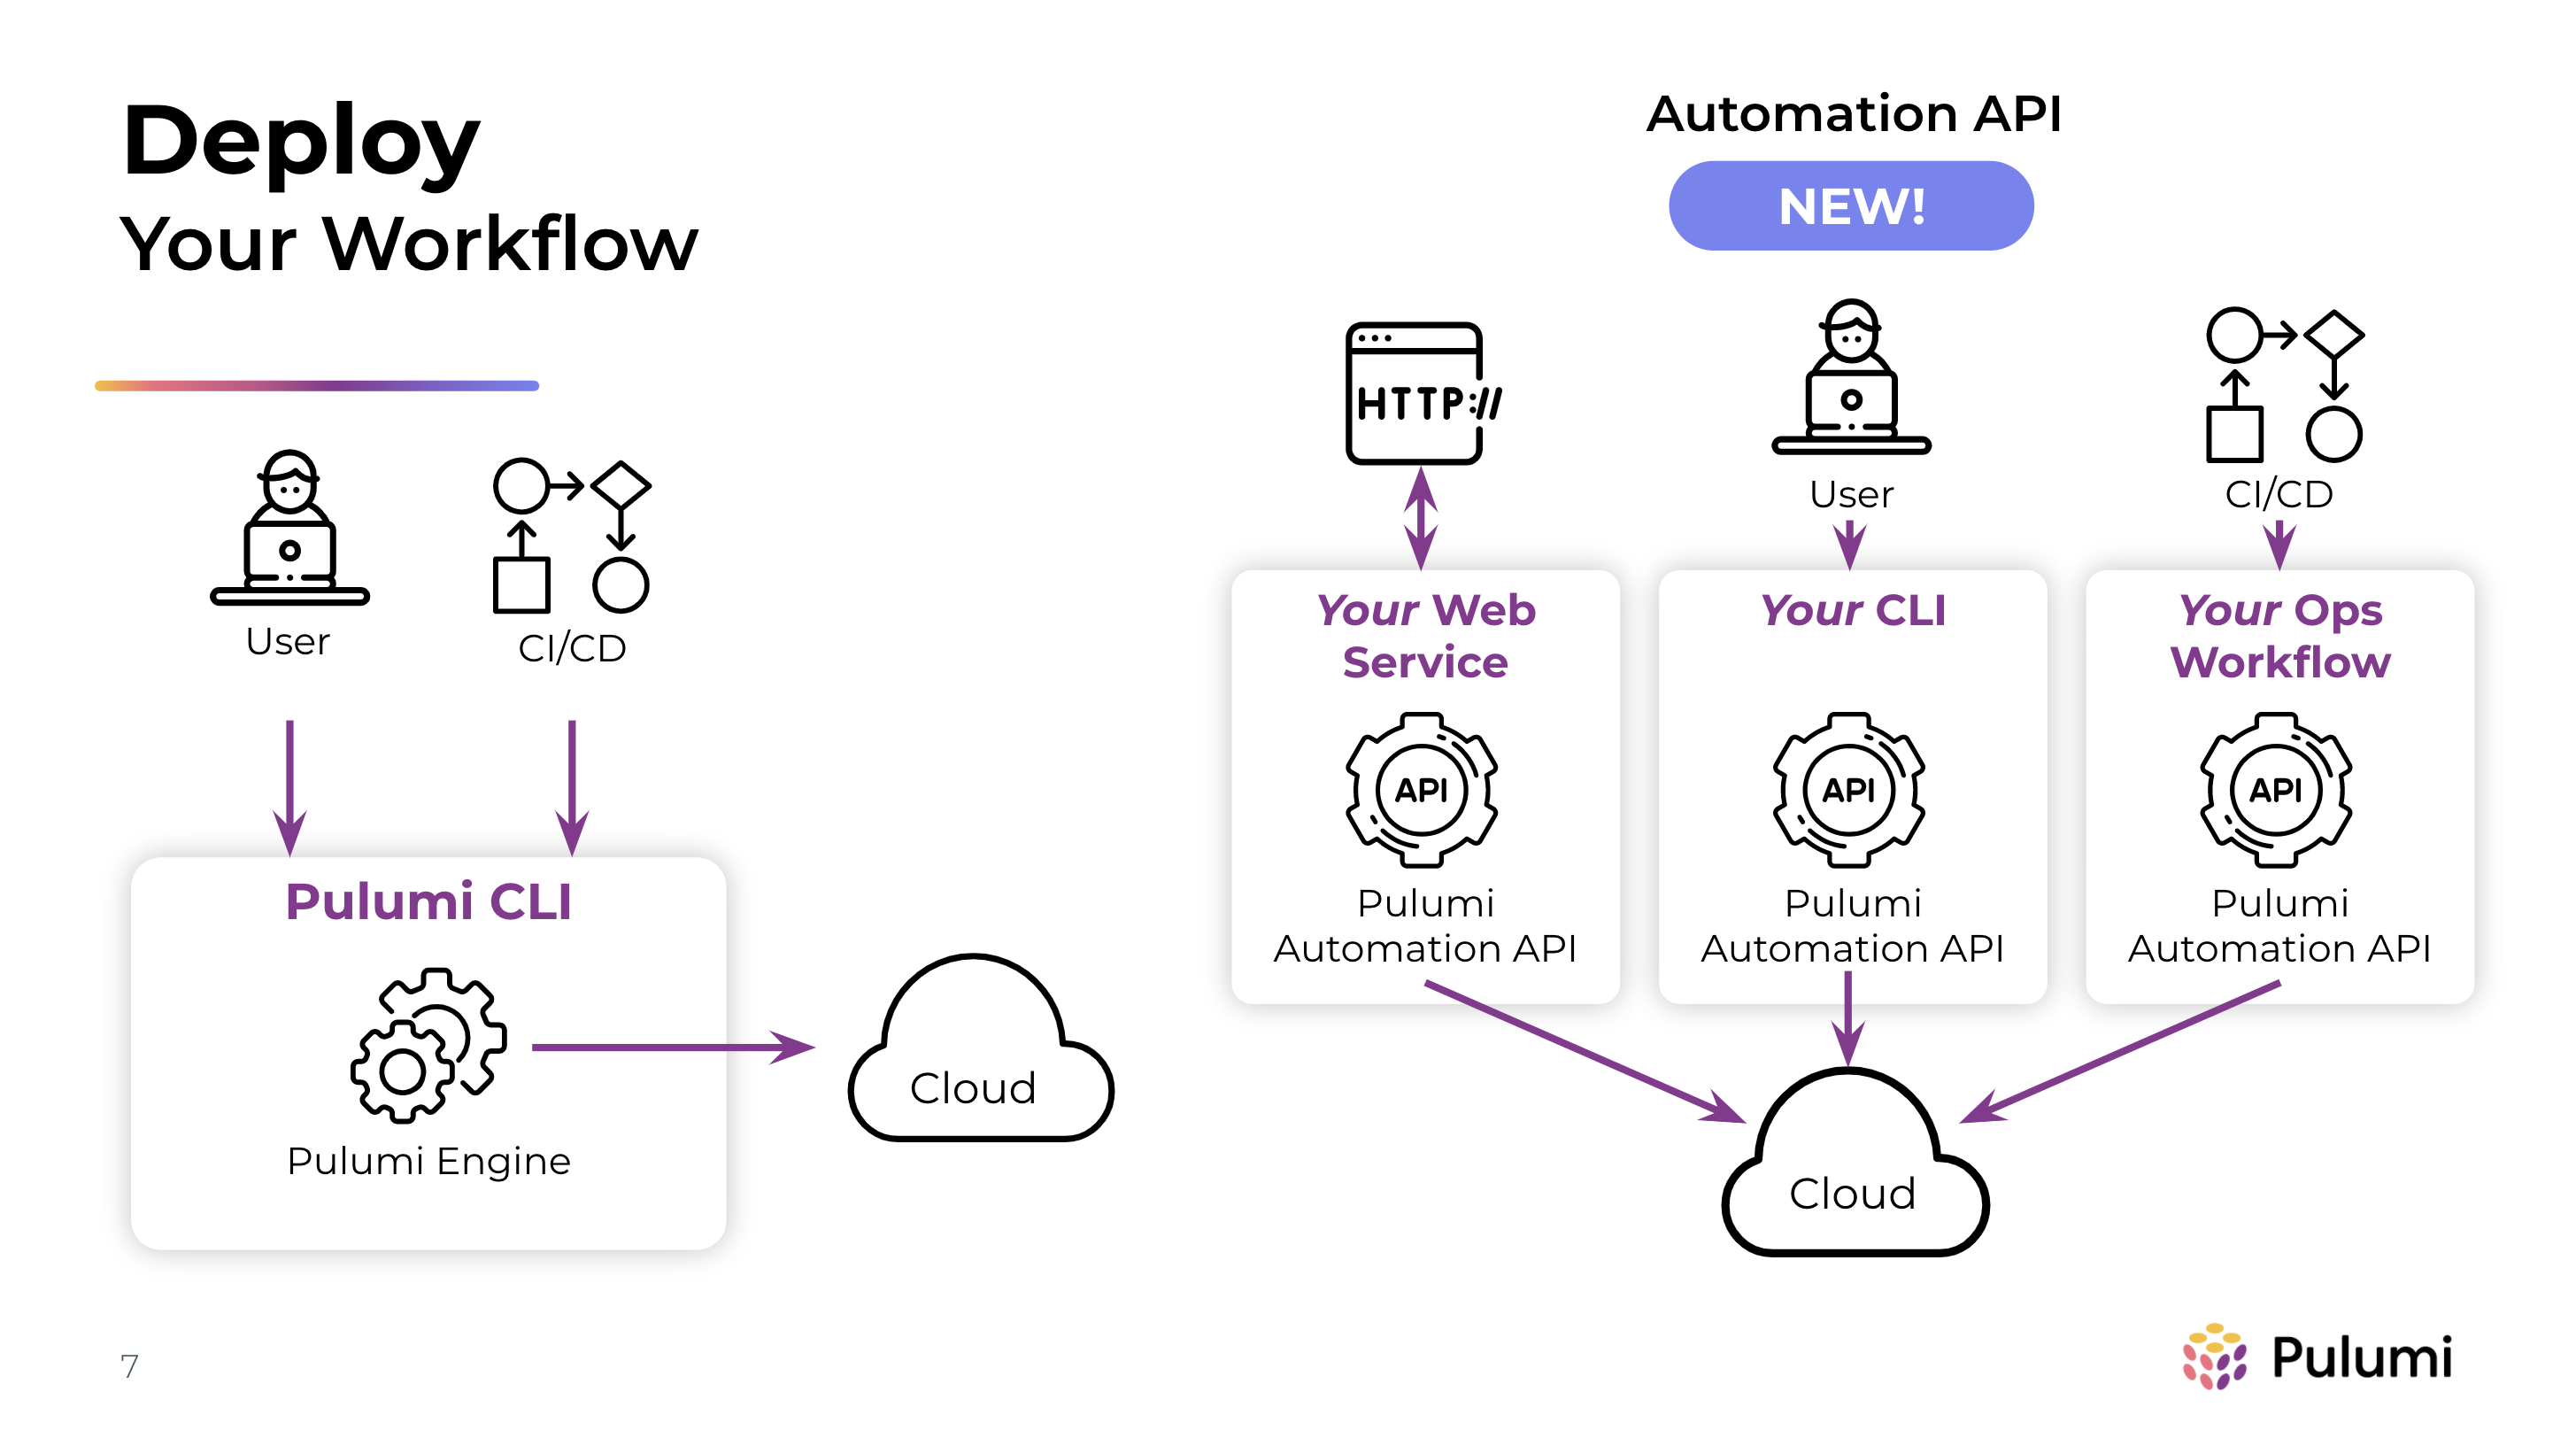 A diagram showing possible uses of Automation API